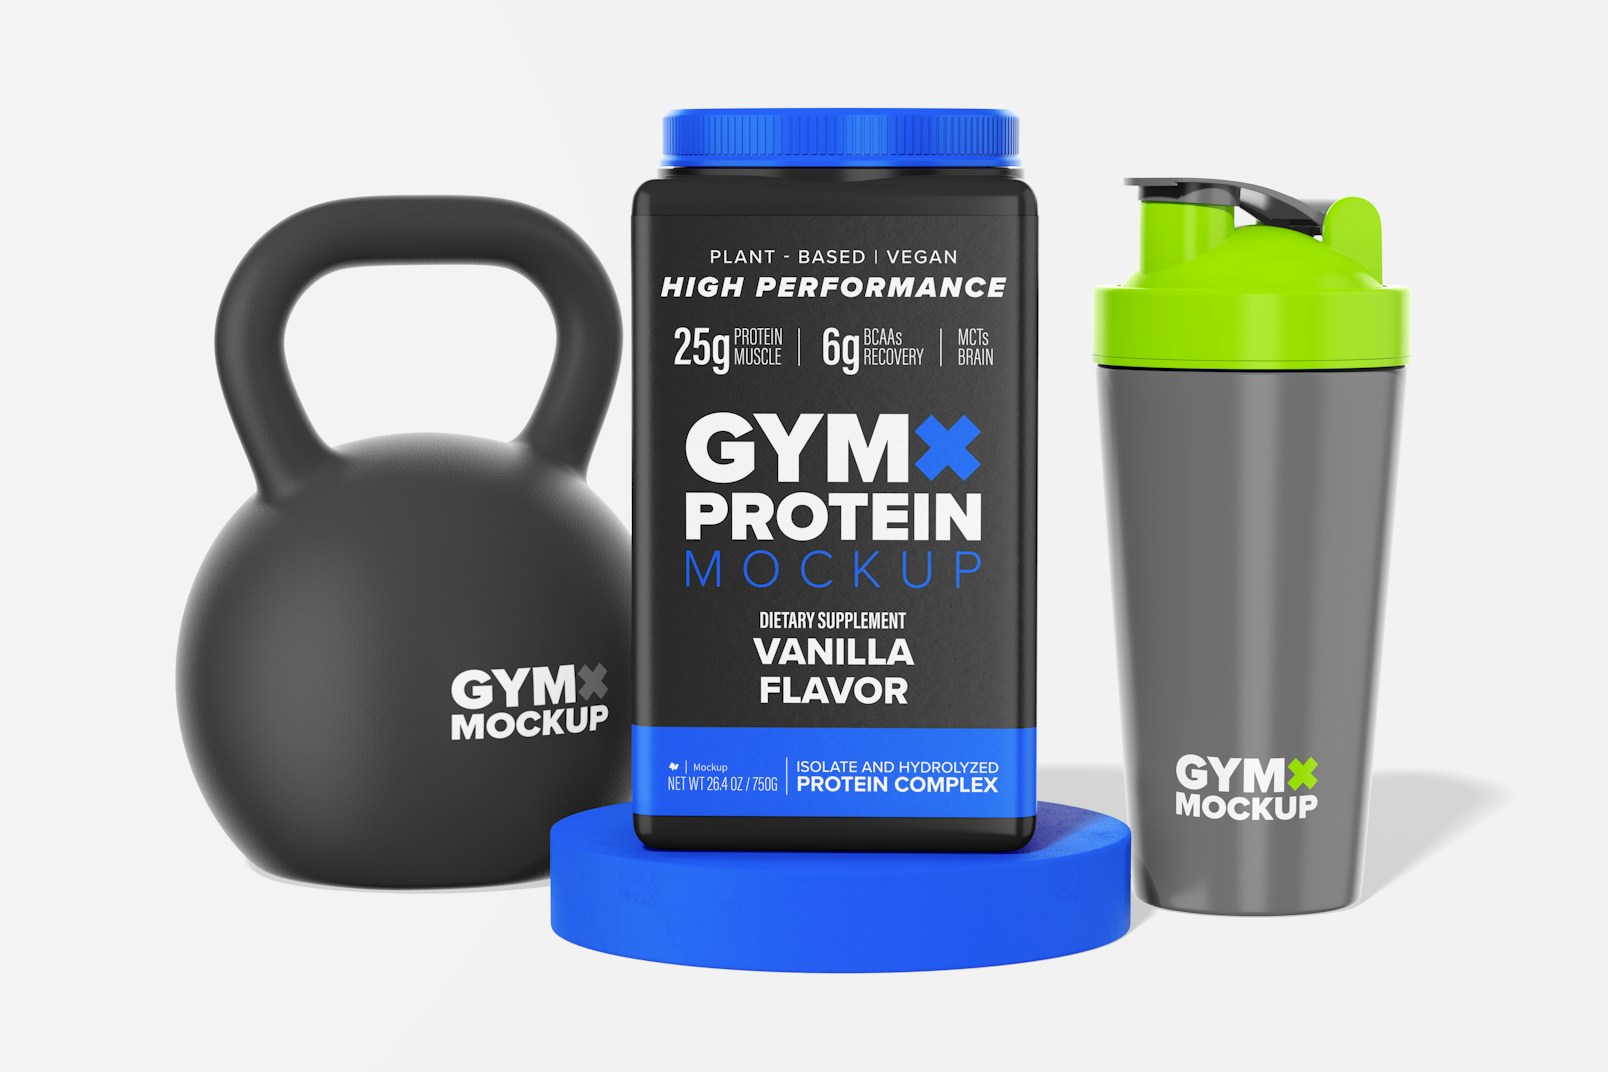 Square Protein Powder Container Mockup, with Bottle